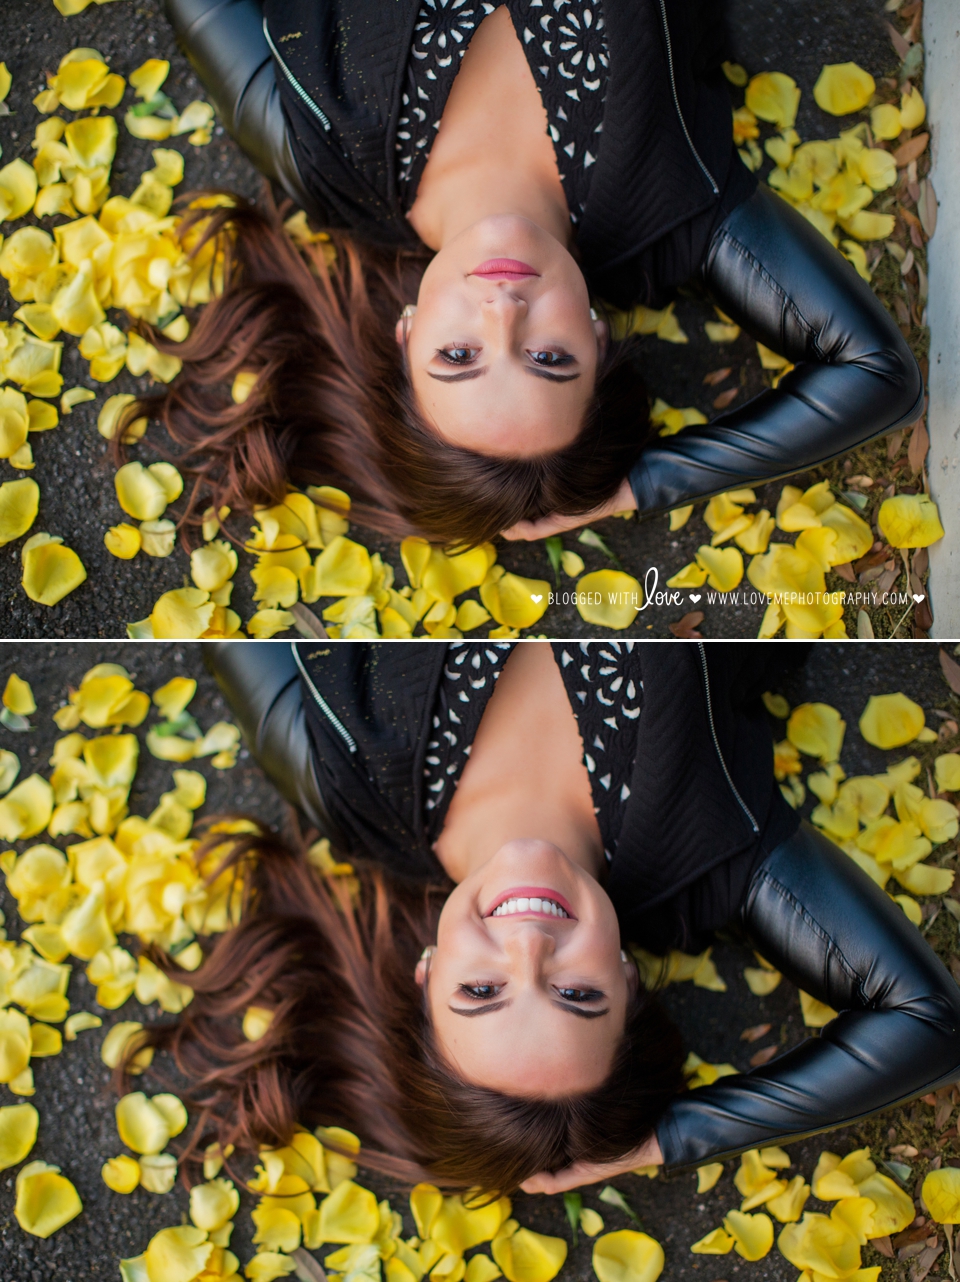 Lying down with yellow petals